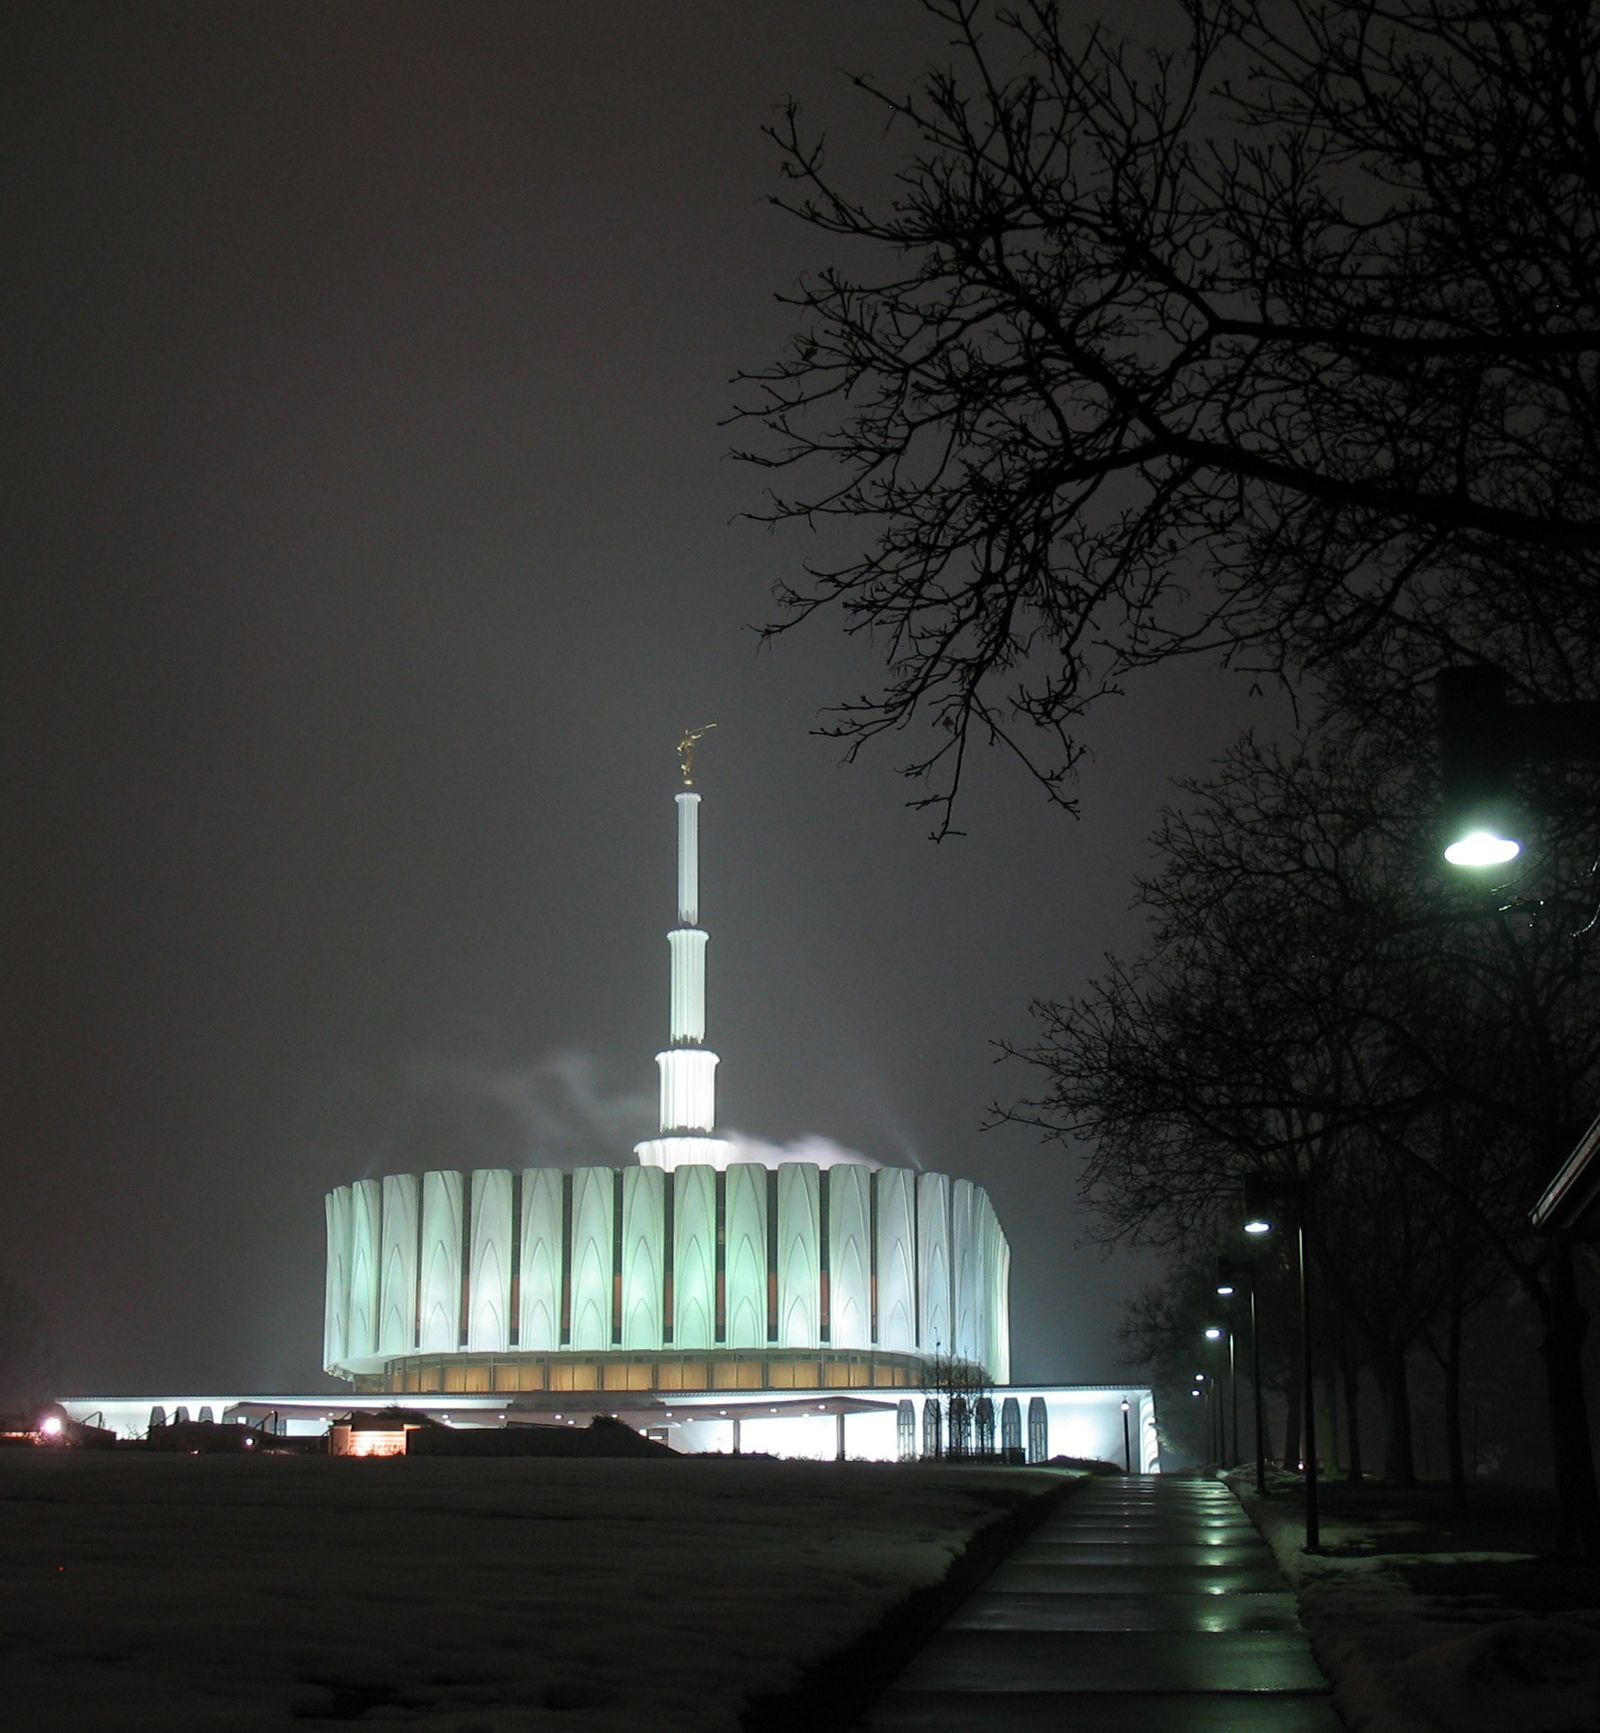 The Provo Utah Temple in the evening, including scenery.